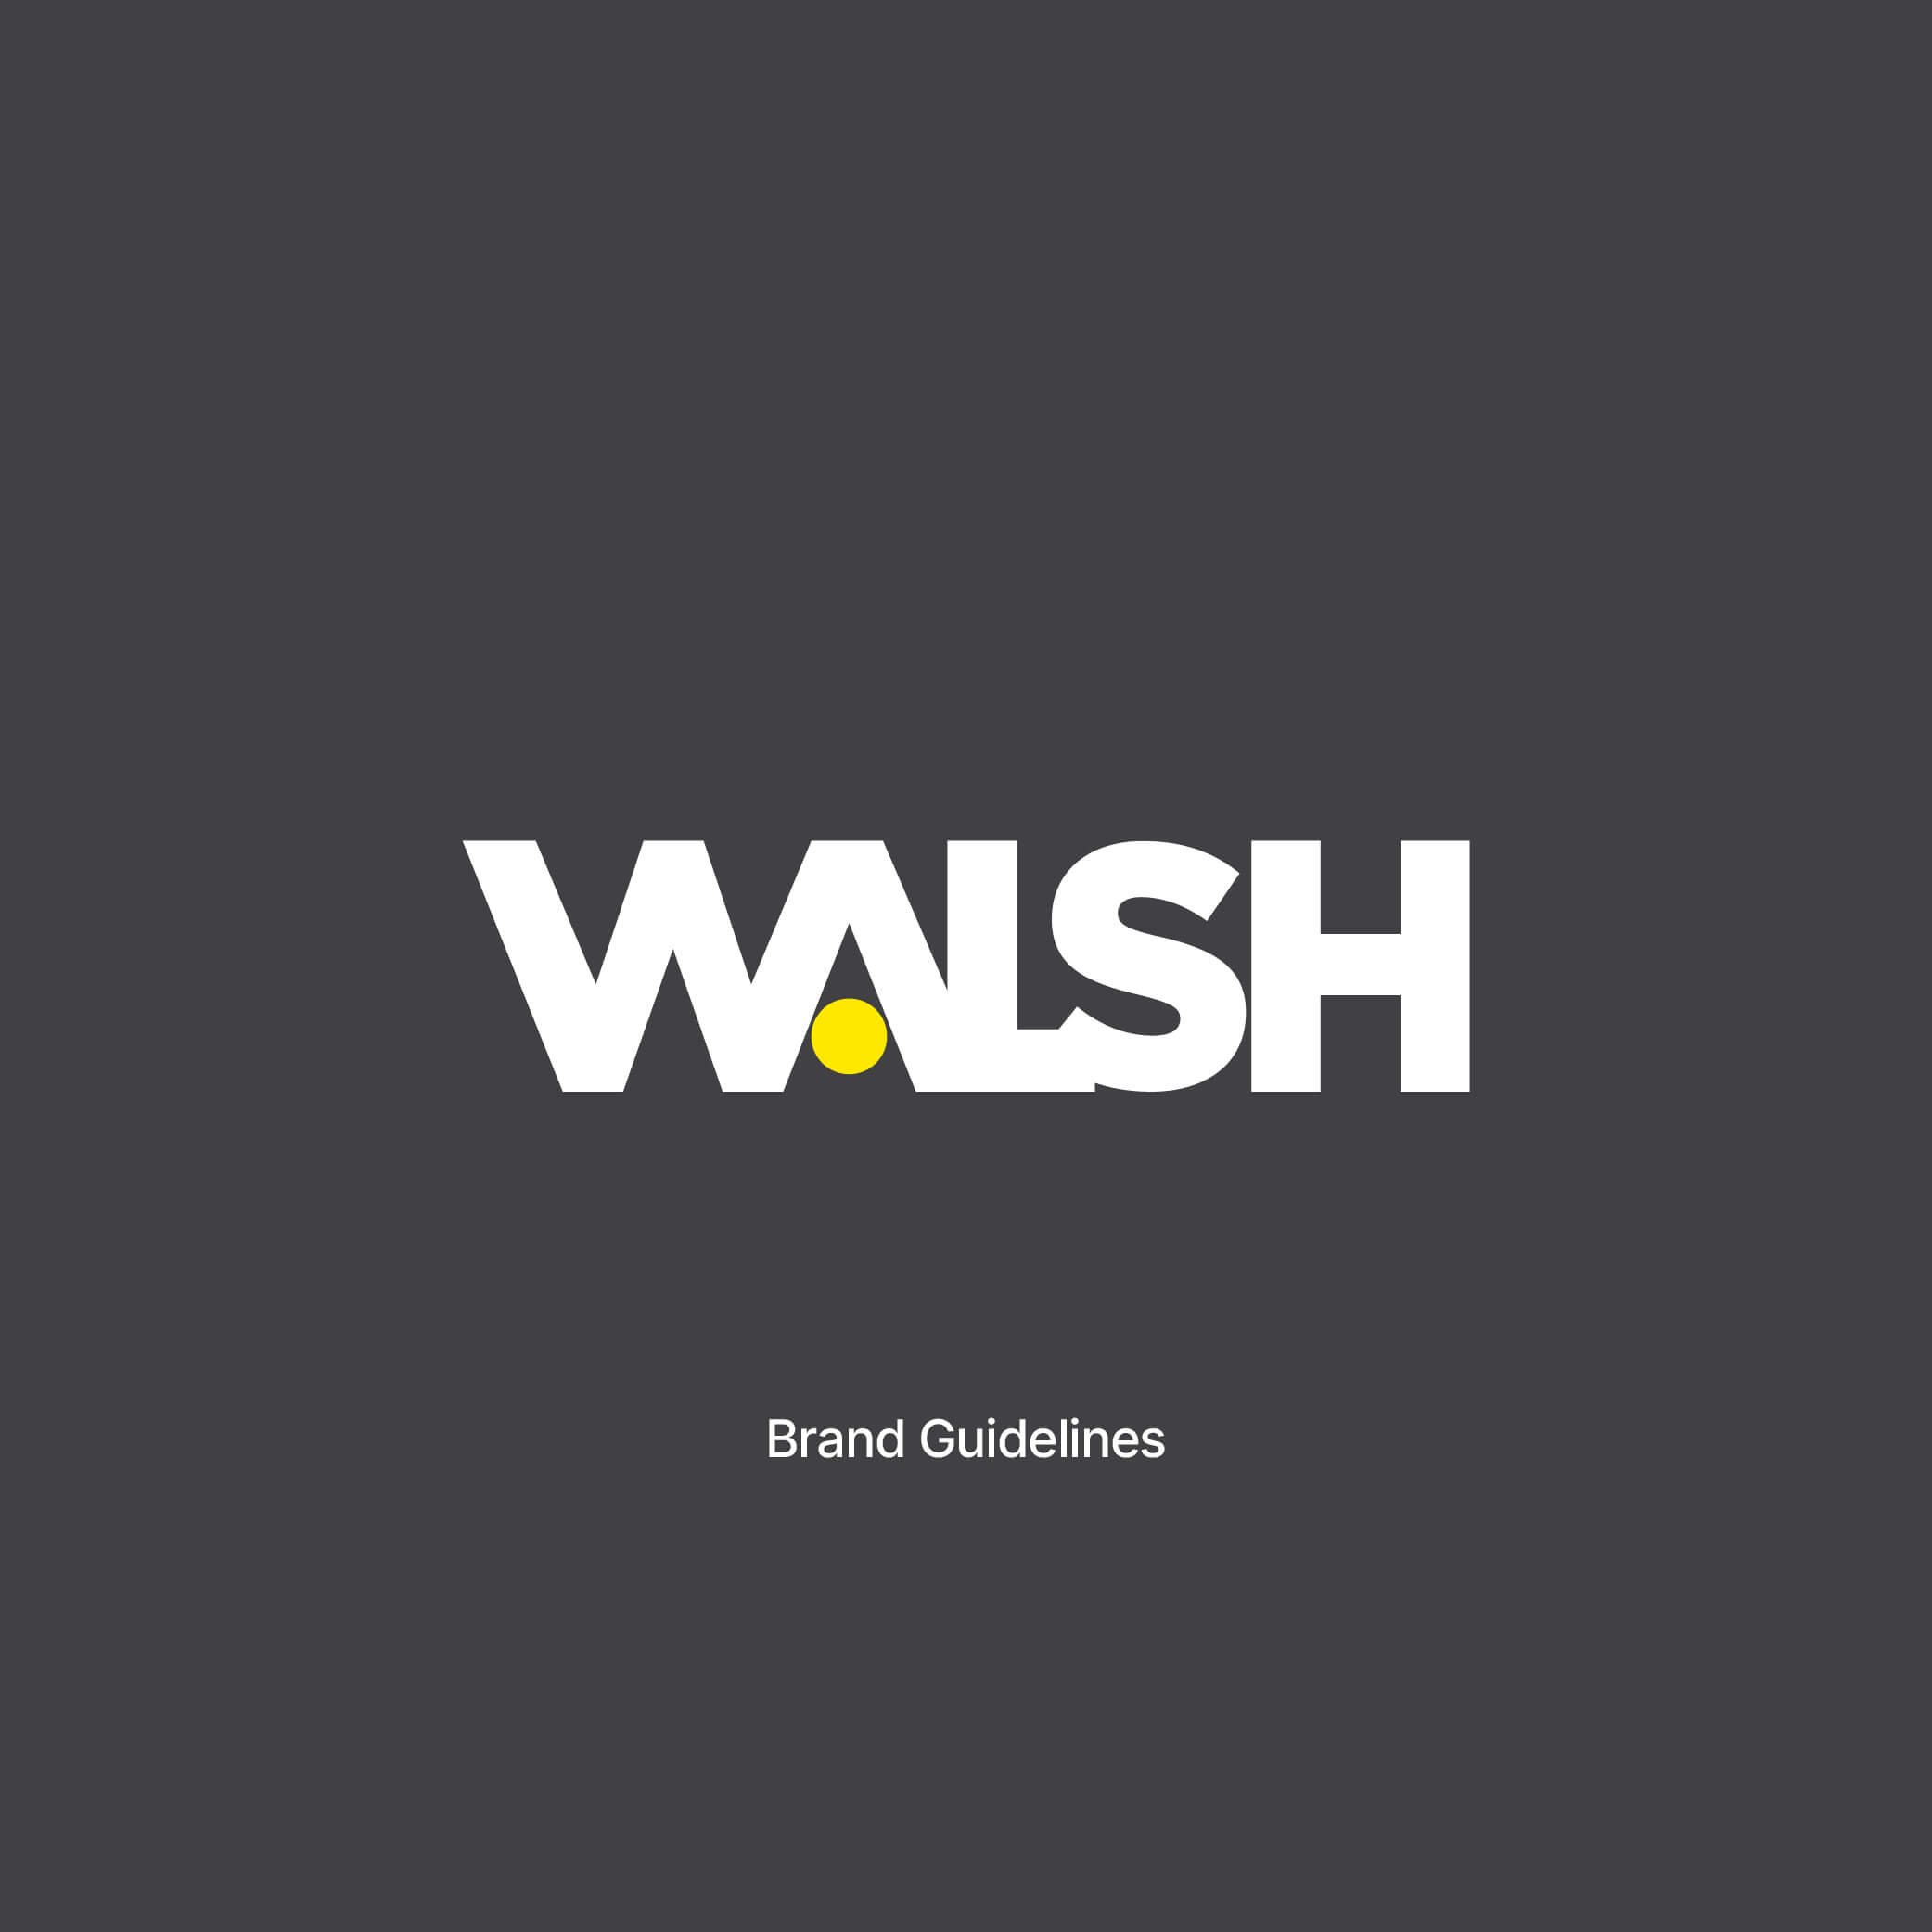 Walsh-Brand-Guidelines